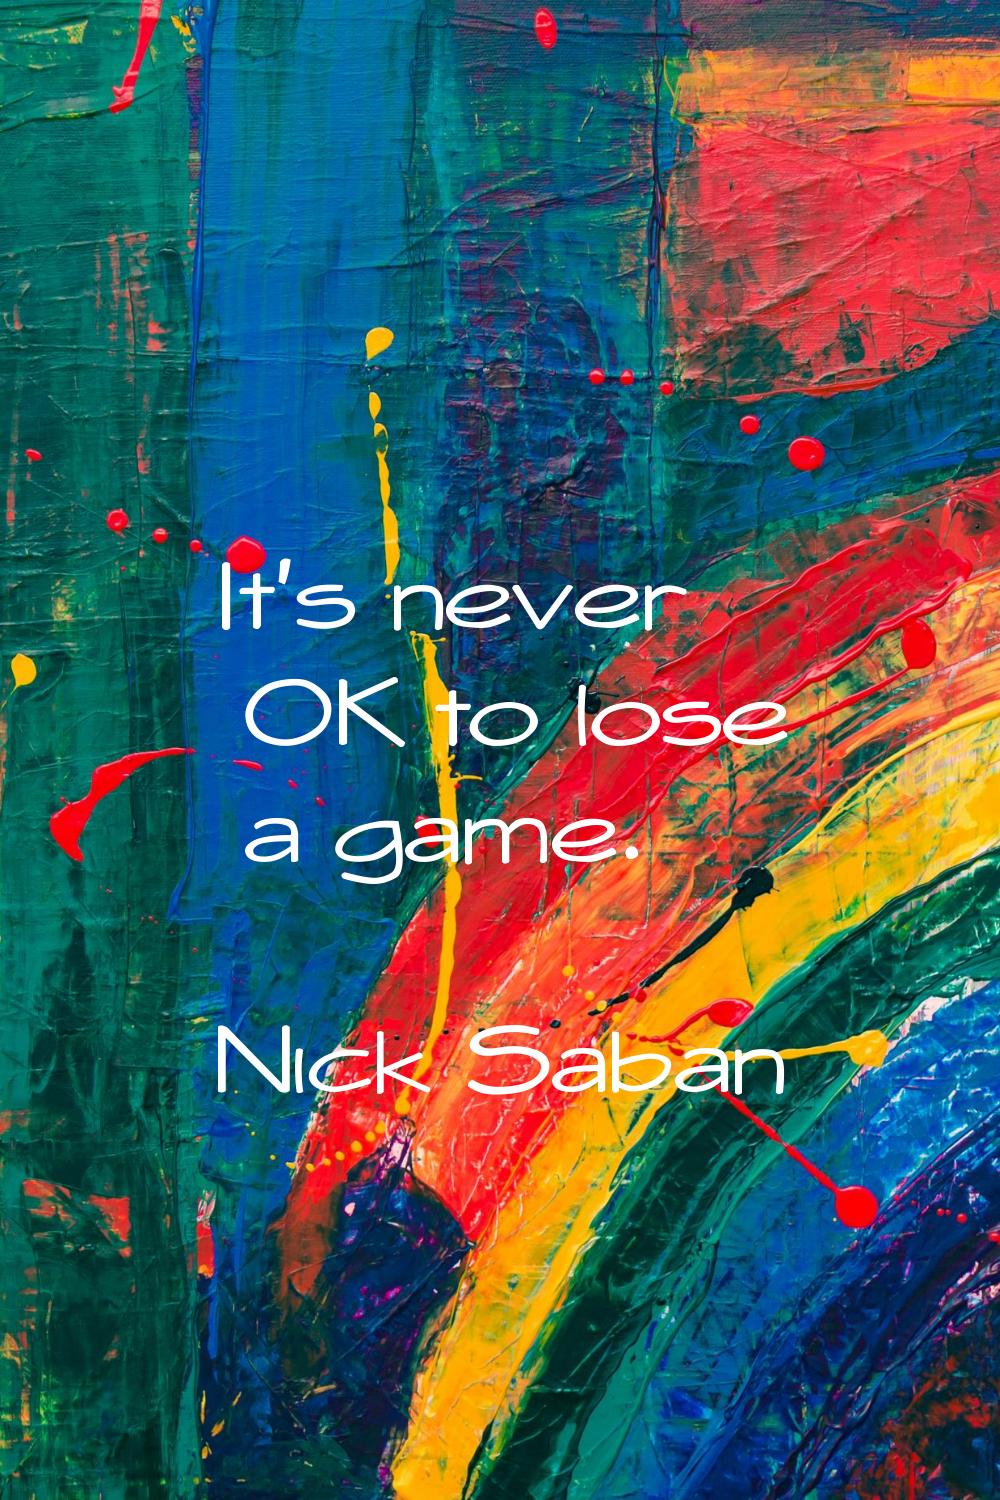 It's never OK to lose a game.